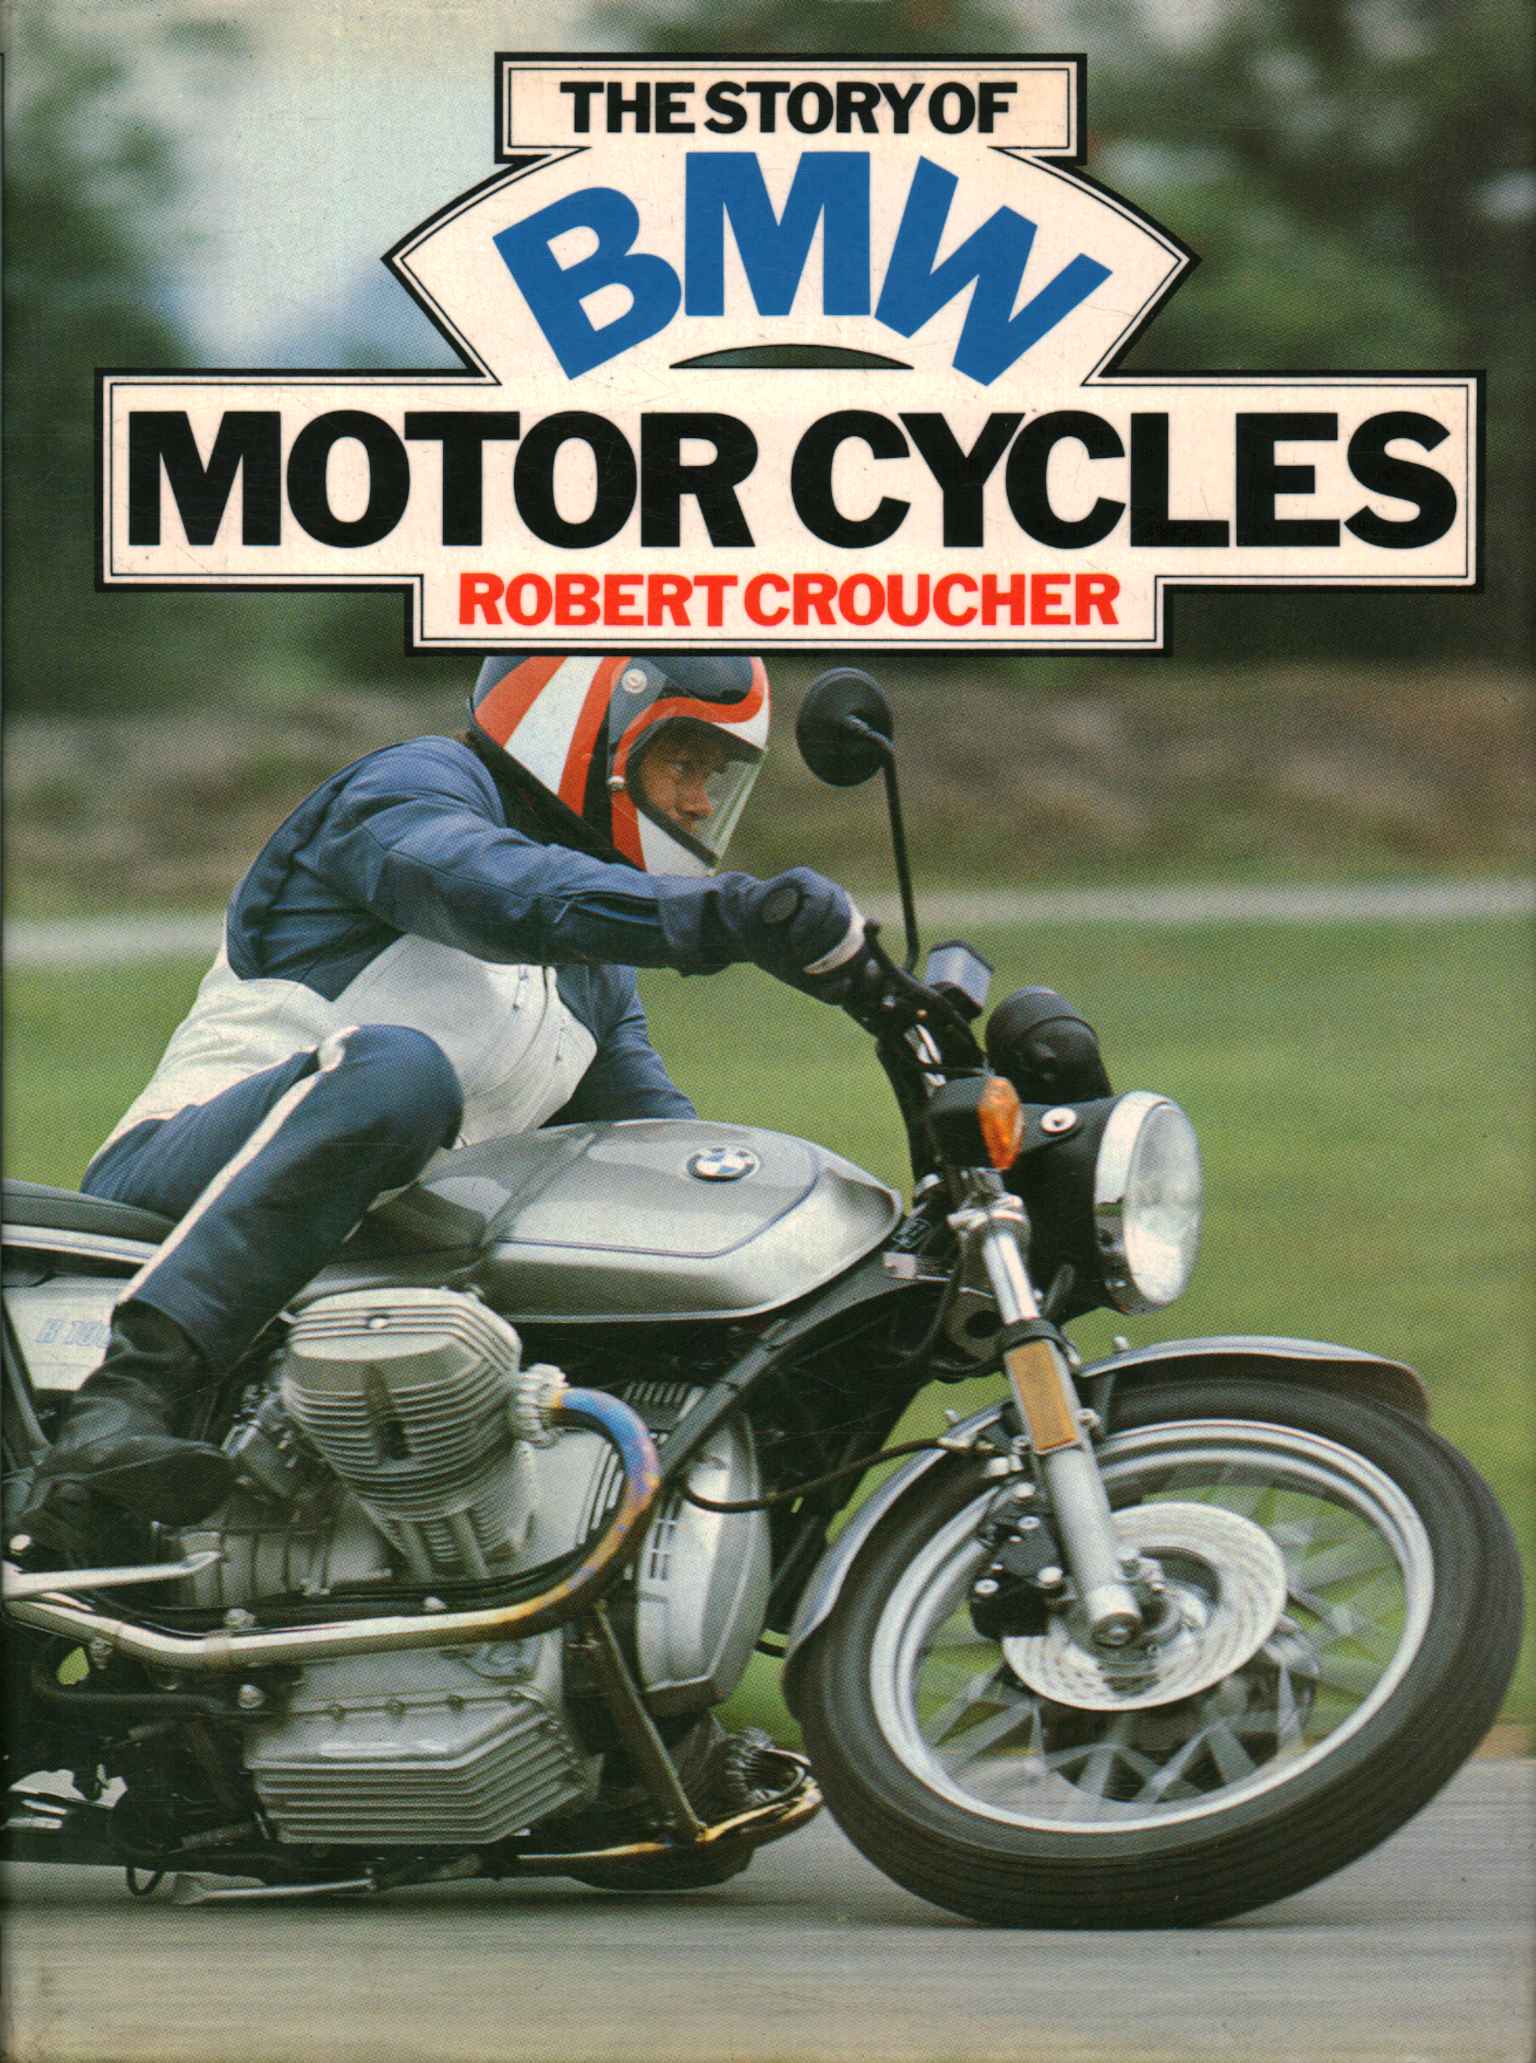 The Story of BMW Motor Cycles